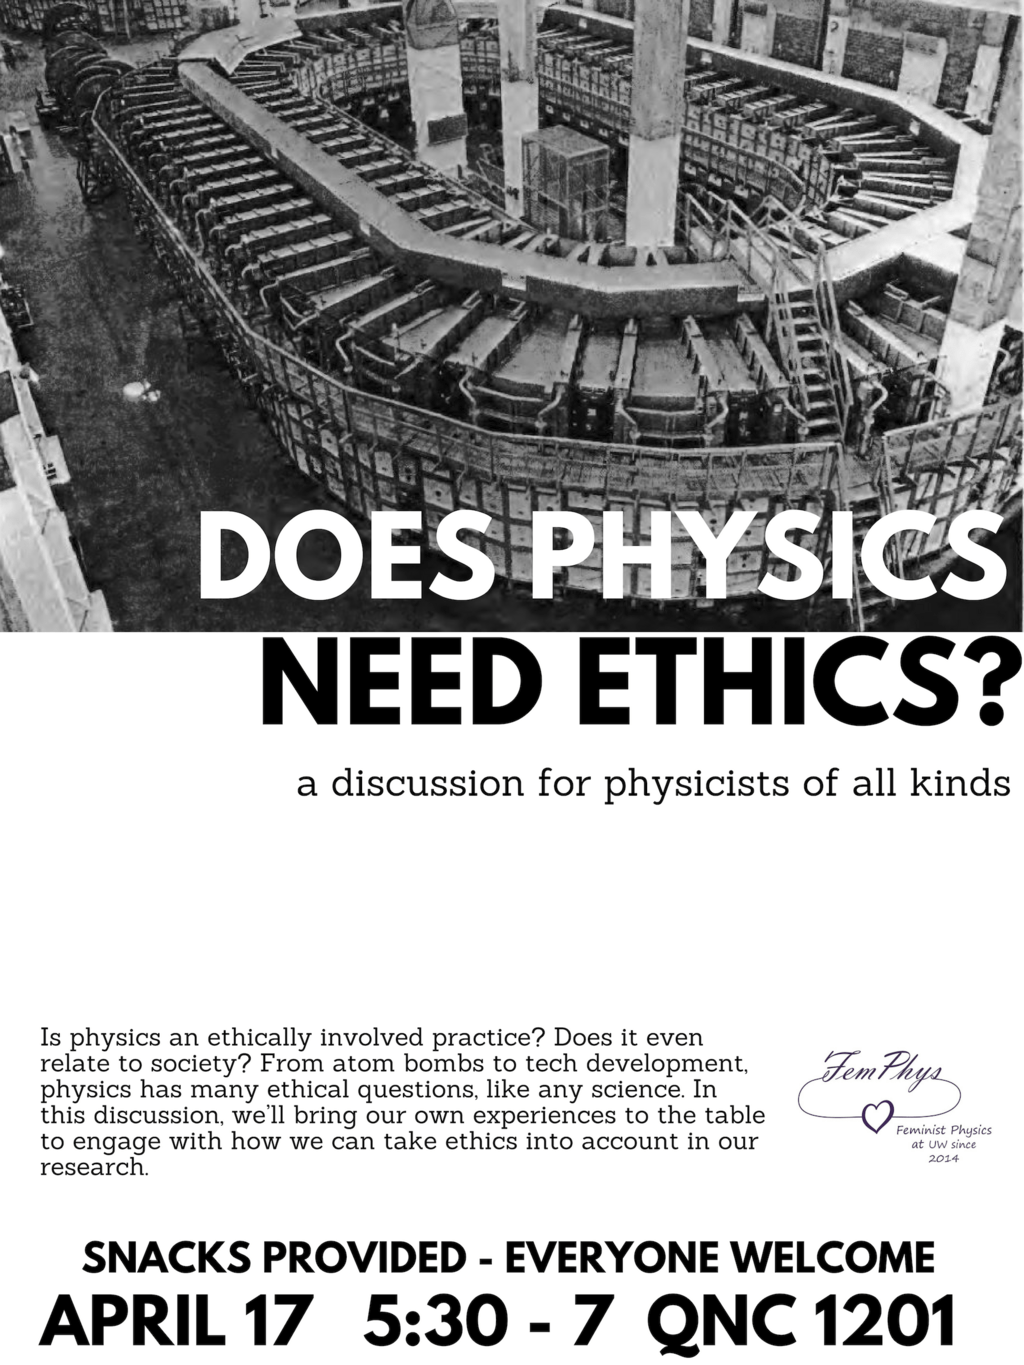 "Does physics need ethics?" in block letters over a particle accelerator used in the Manhattan Project.